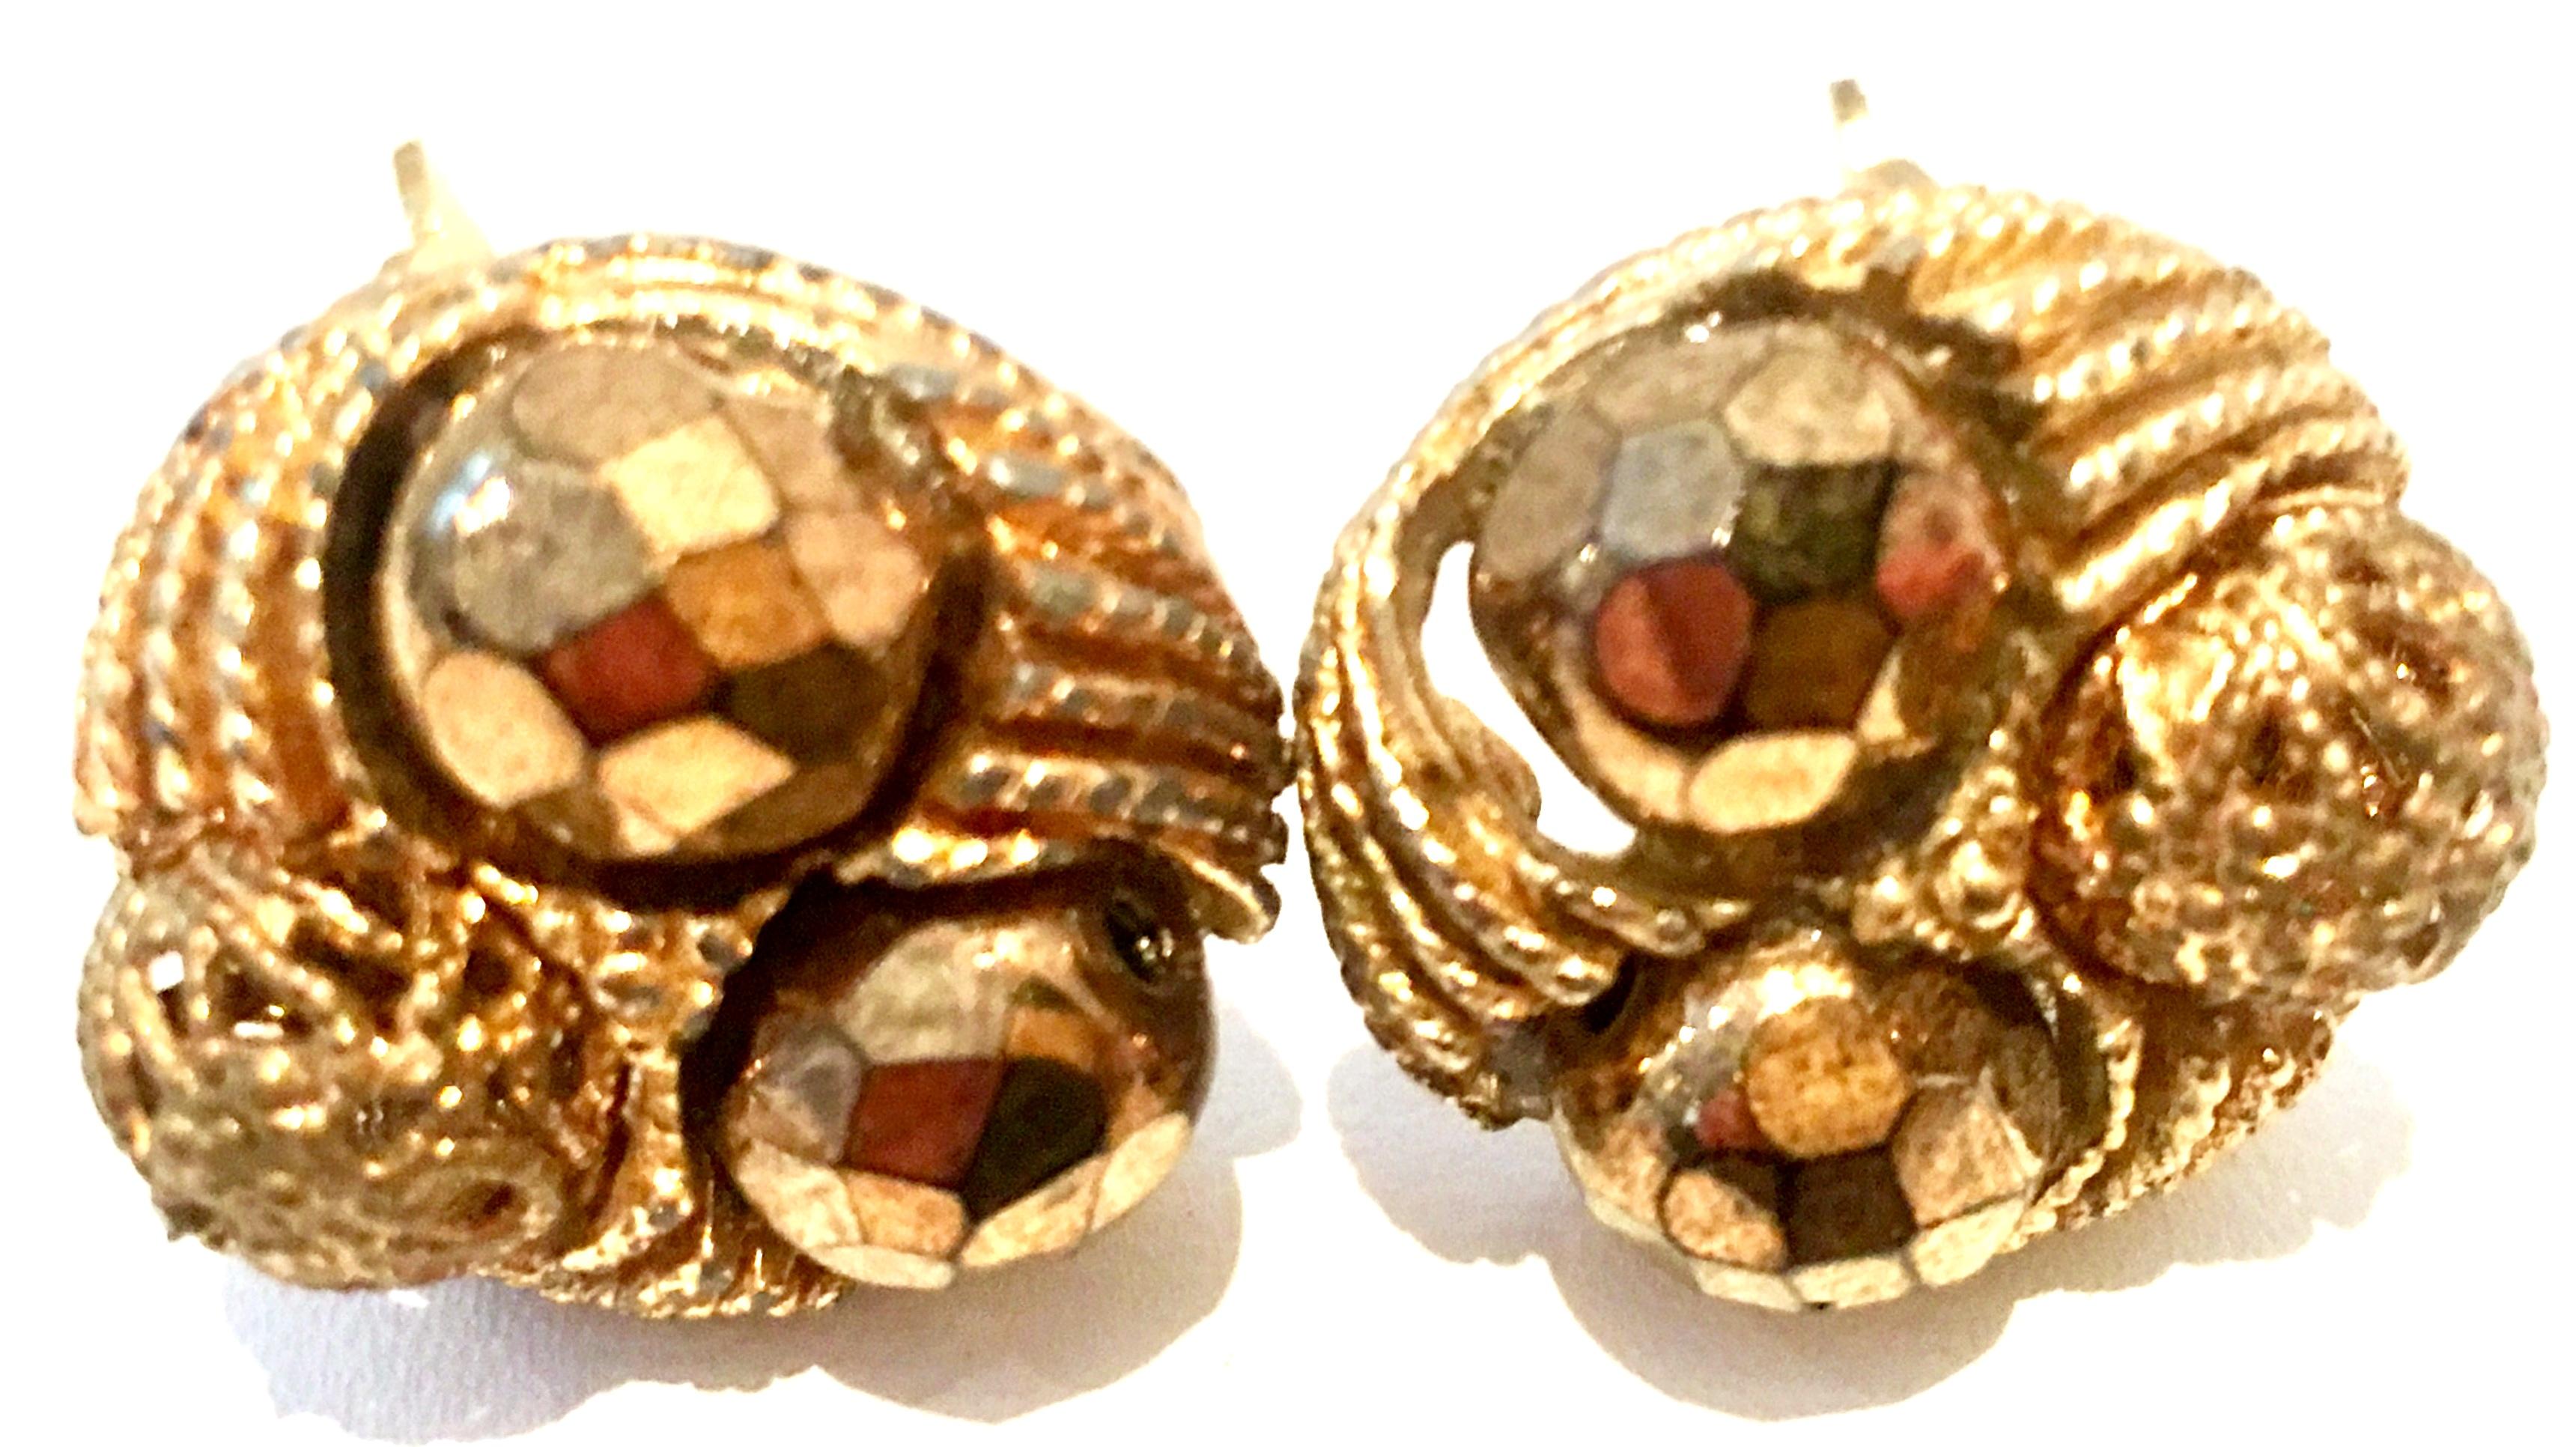 Mid-20th Century Gold Plate Beaded Earrings. These clip style gold plate earrings feature brilliant cut and faceted mirrored round bead detail.
see our listing for the matching necklace item #LU75738004432